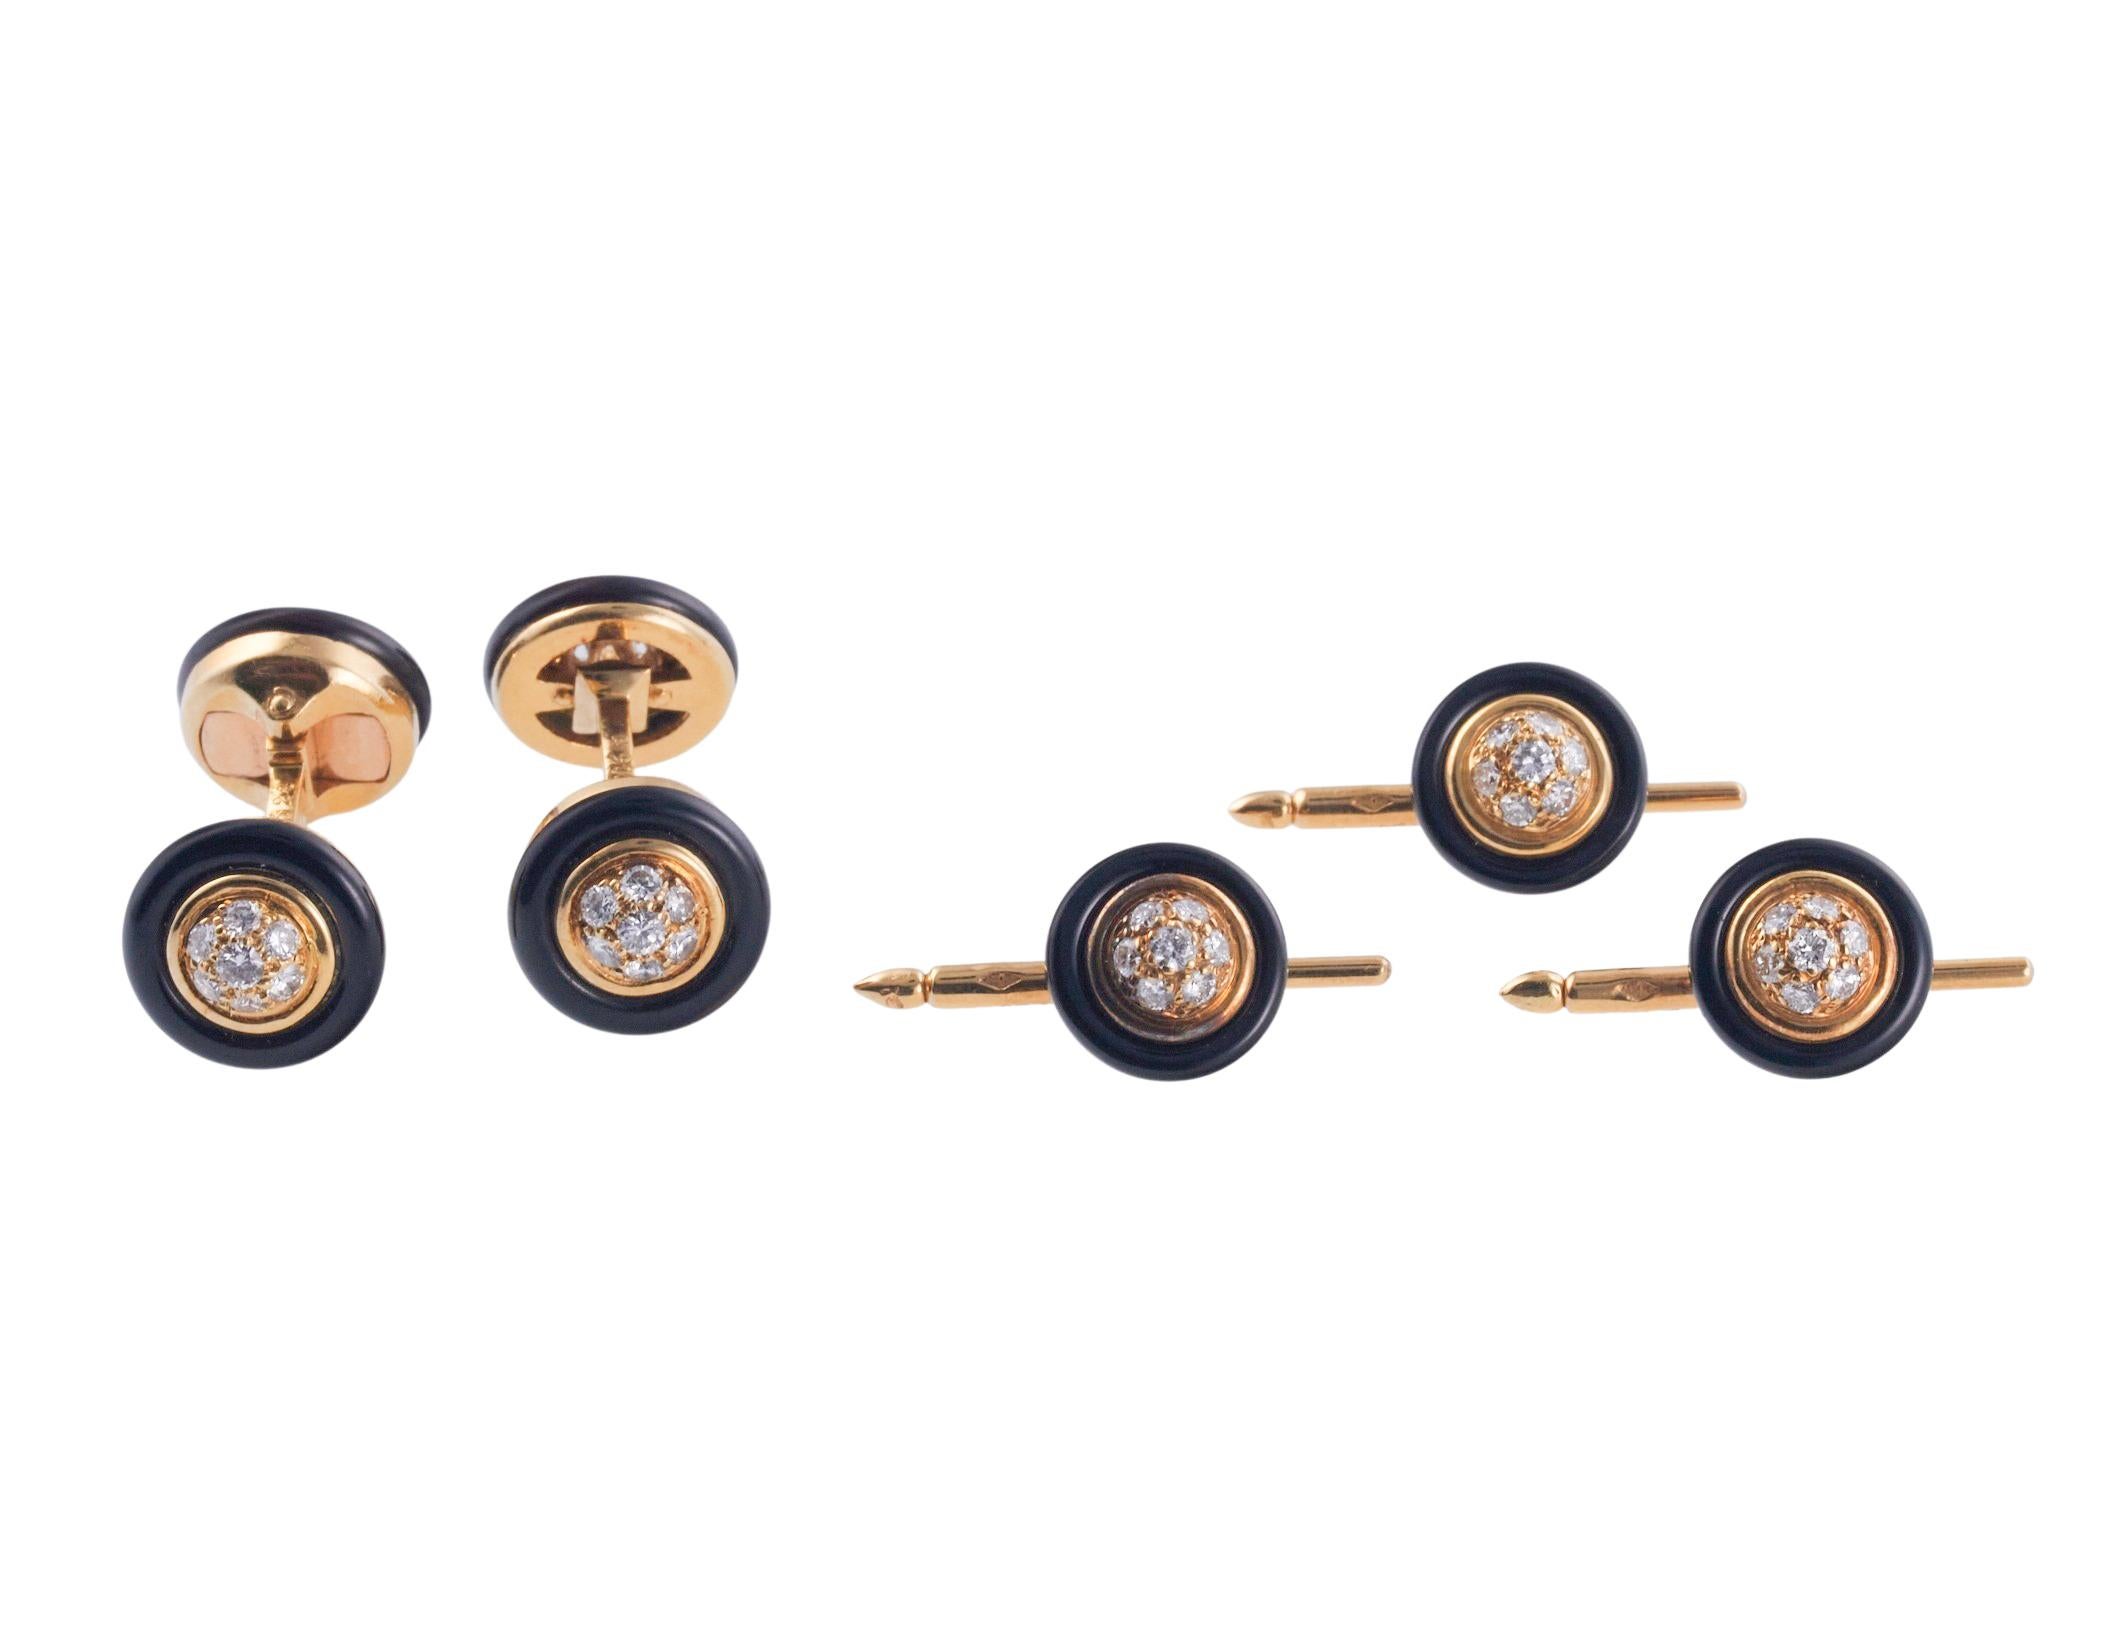 Classic 18k gold cufflinks & studs set by Van Cleef & Arpels, featuring diamonds in the center, approx. 0.80ctw G/VS, and onyx rim. Cufflink top measures 0.5